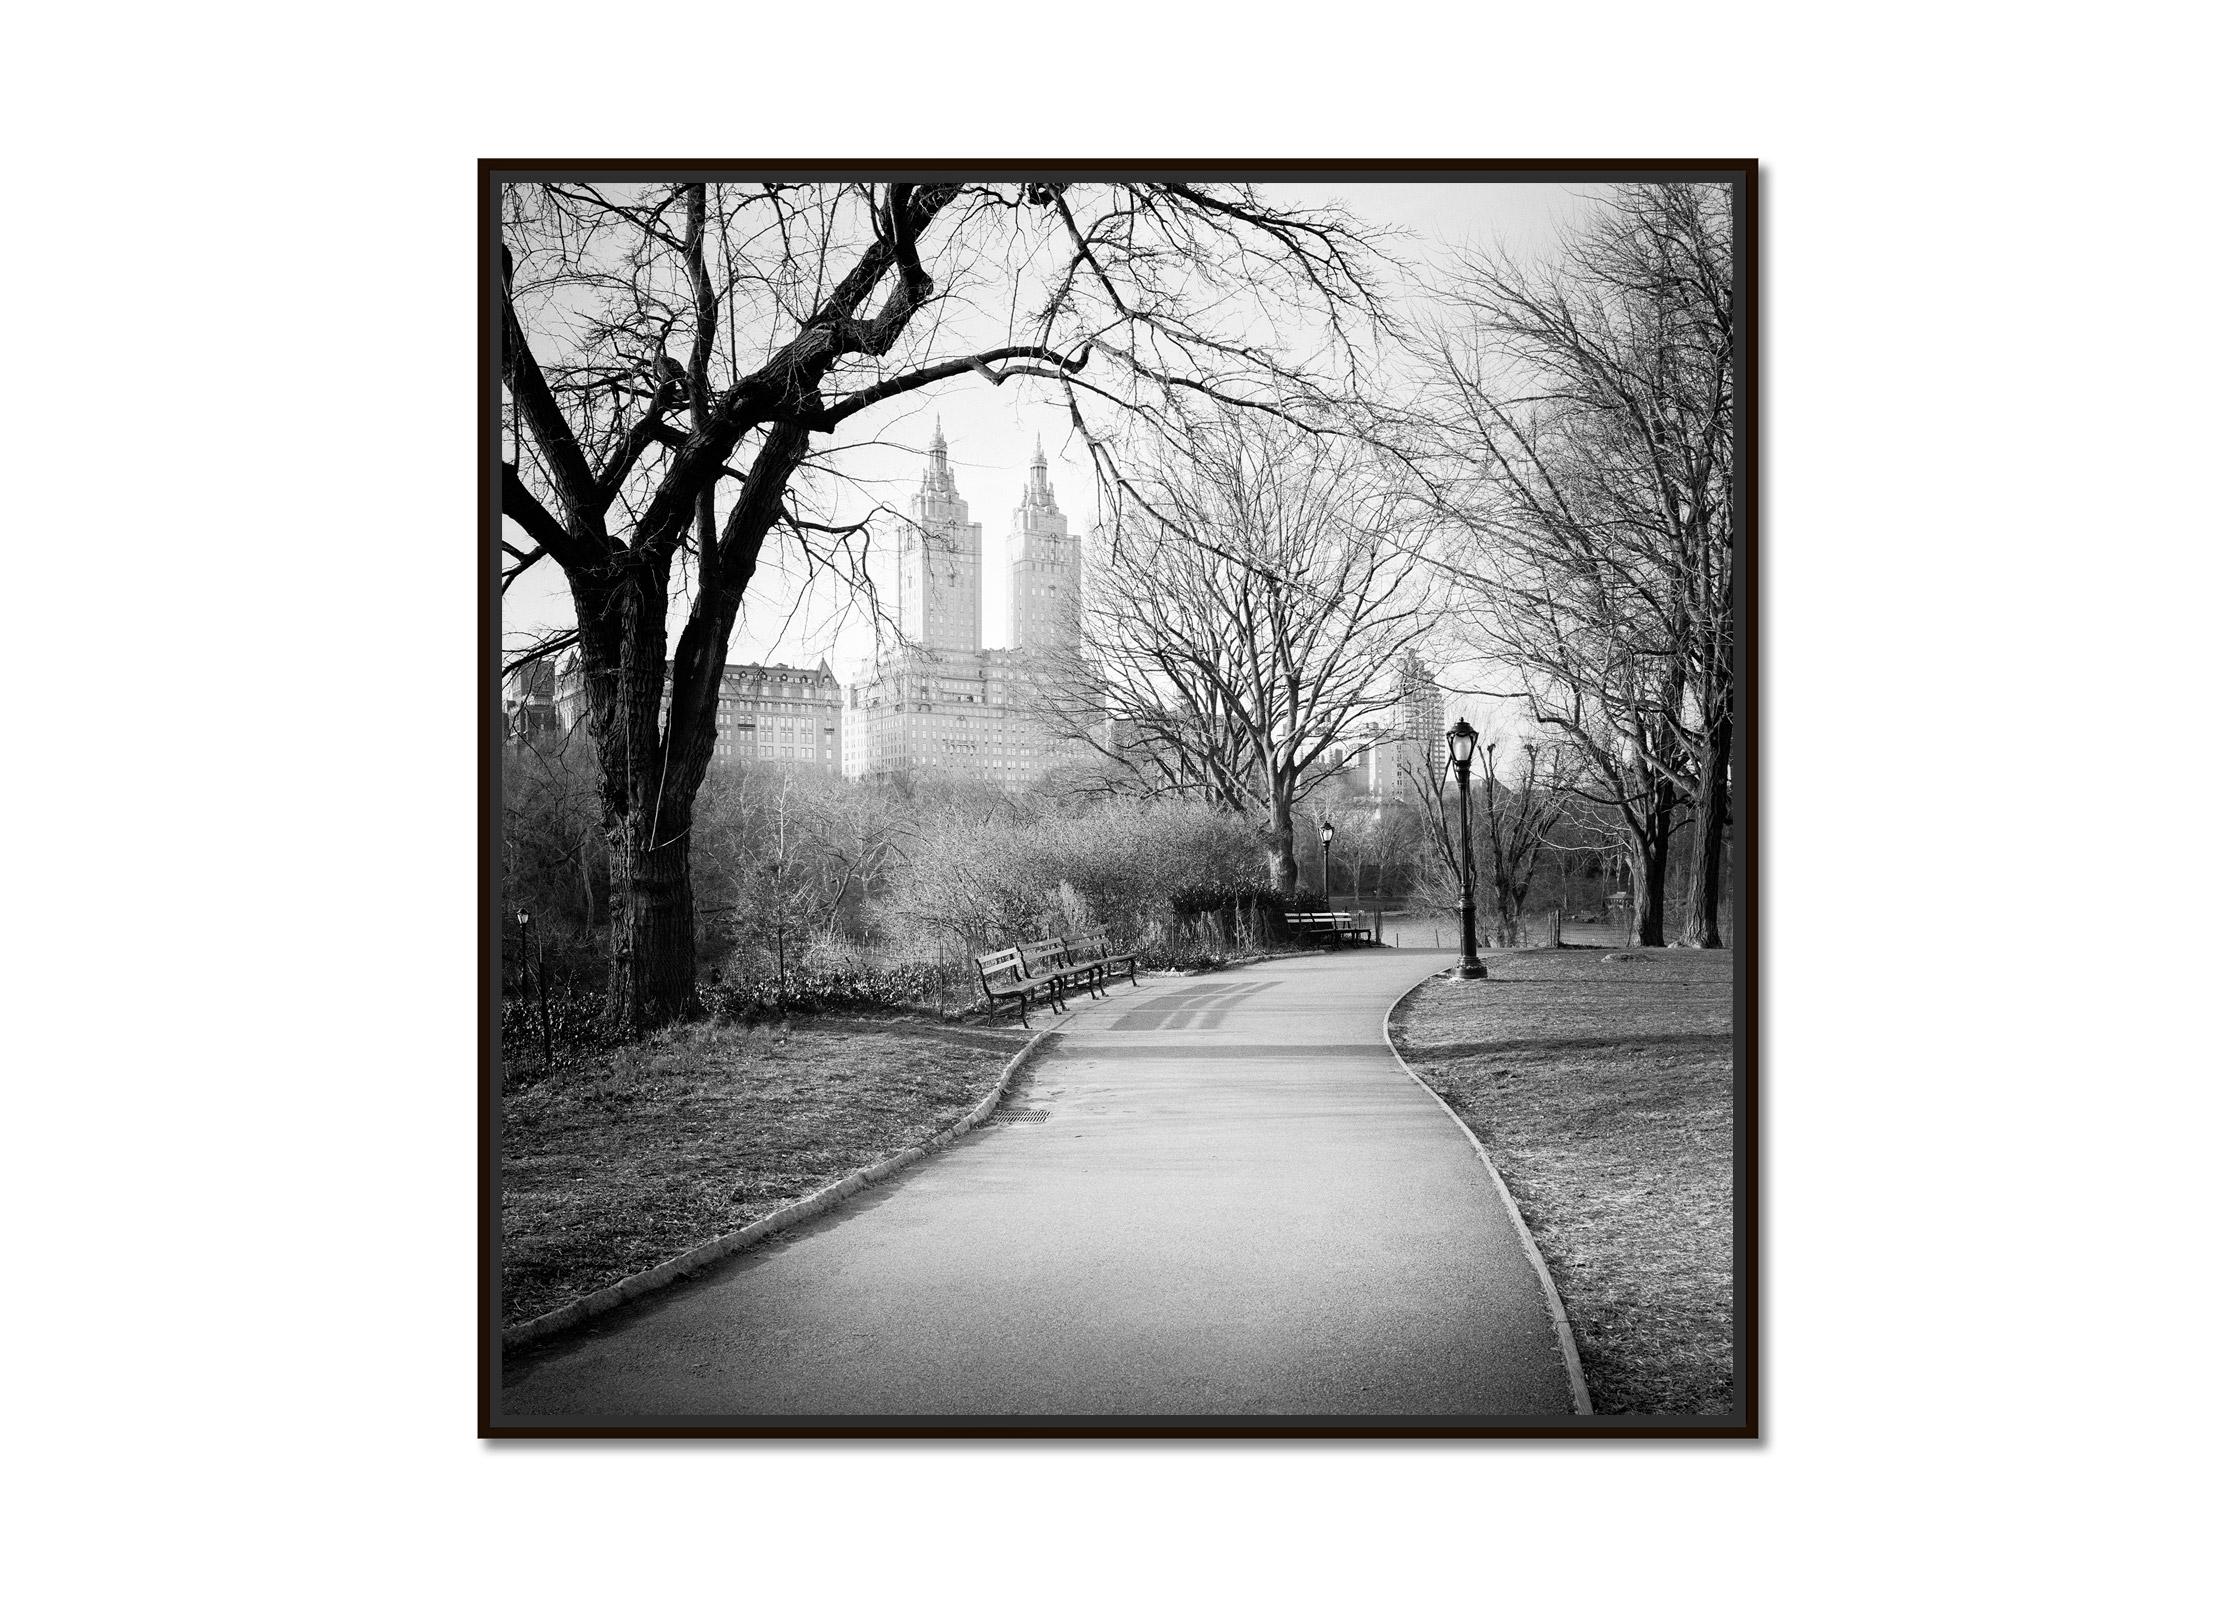 The San Remo, Central Park, New York City, black and white cityscape photography - Photograph by Gerald Berghammer